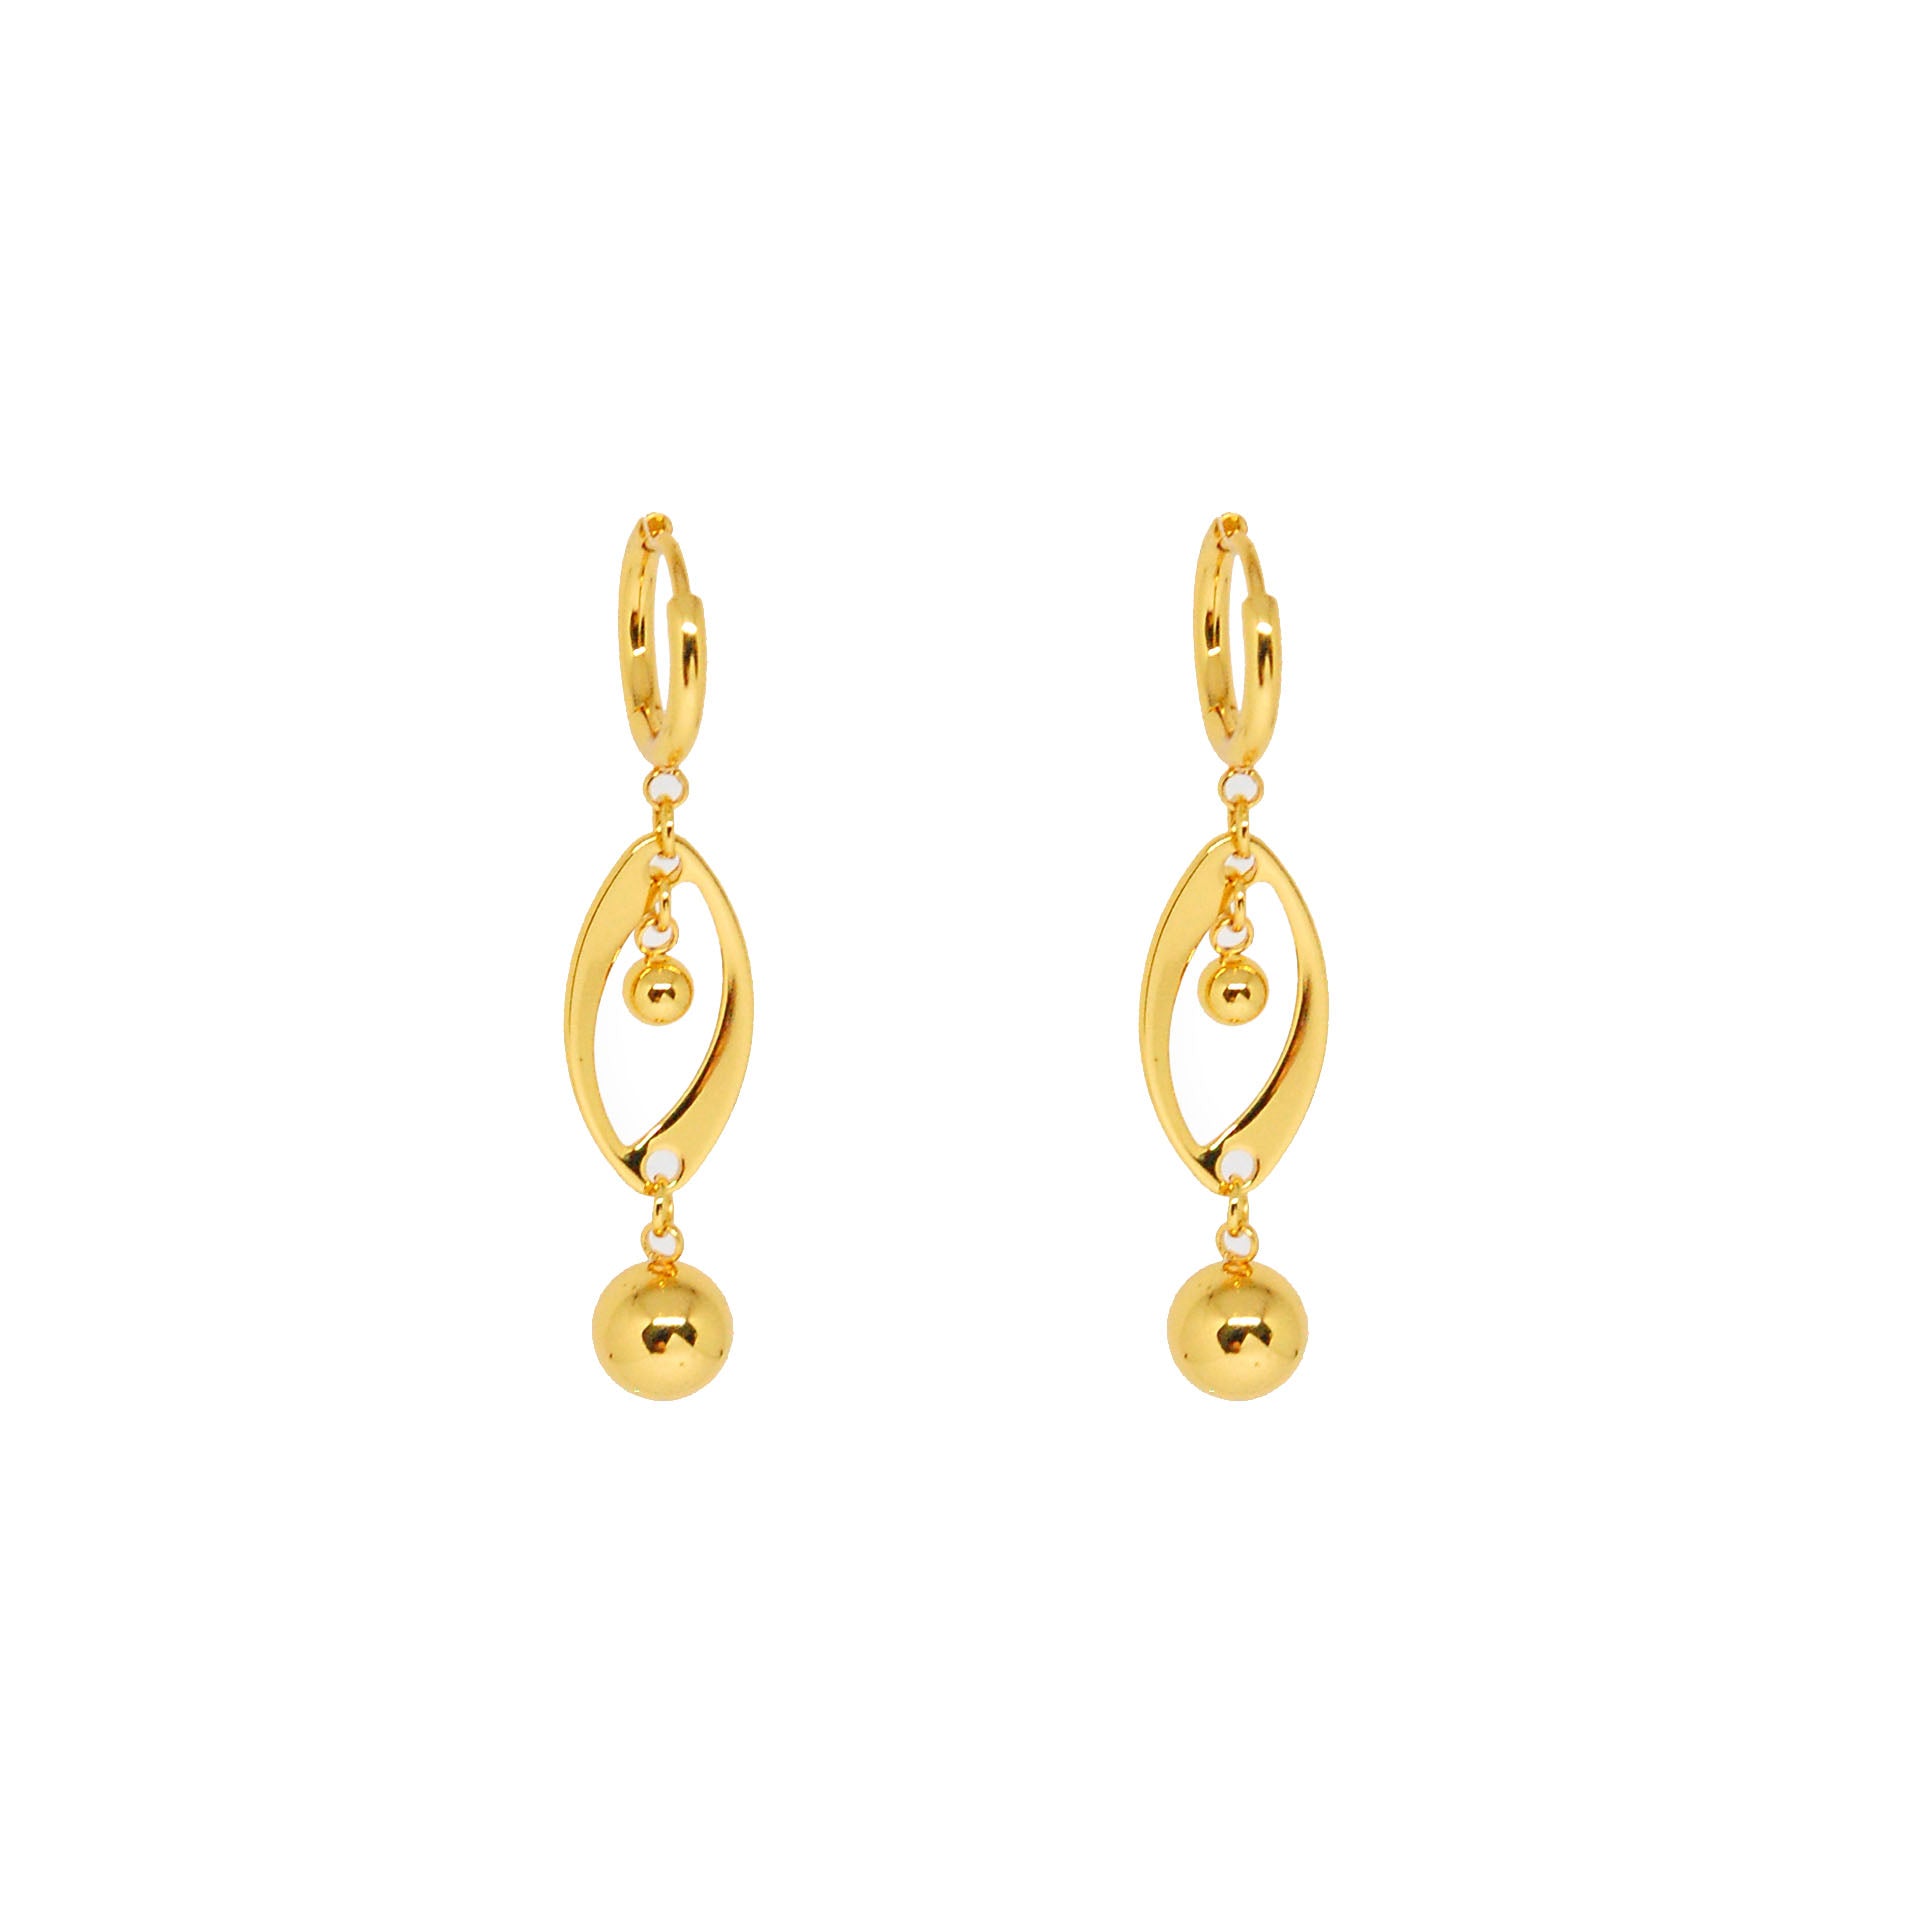 ESE 7838: All IPG Ball & Curved Dangling Hoops Earring